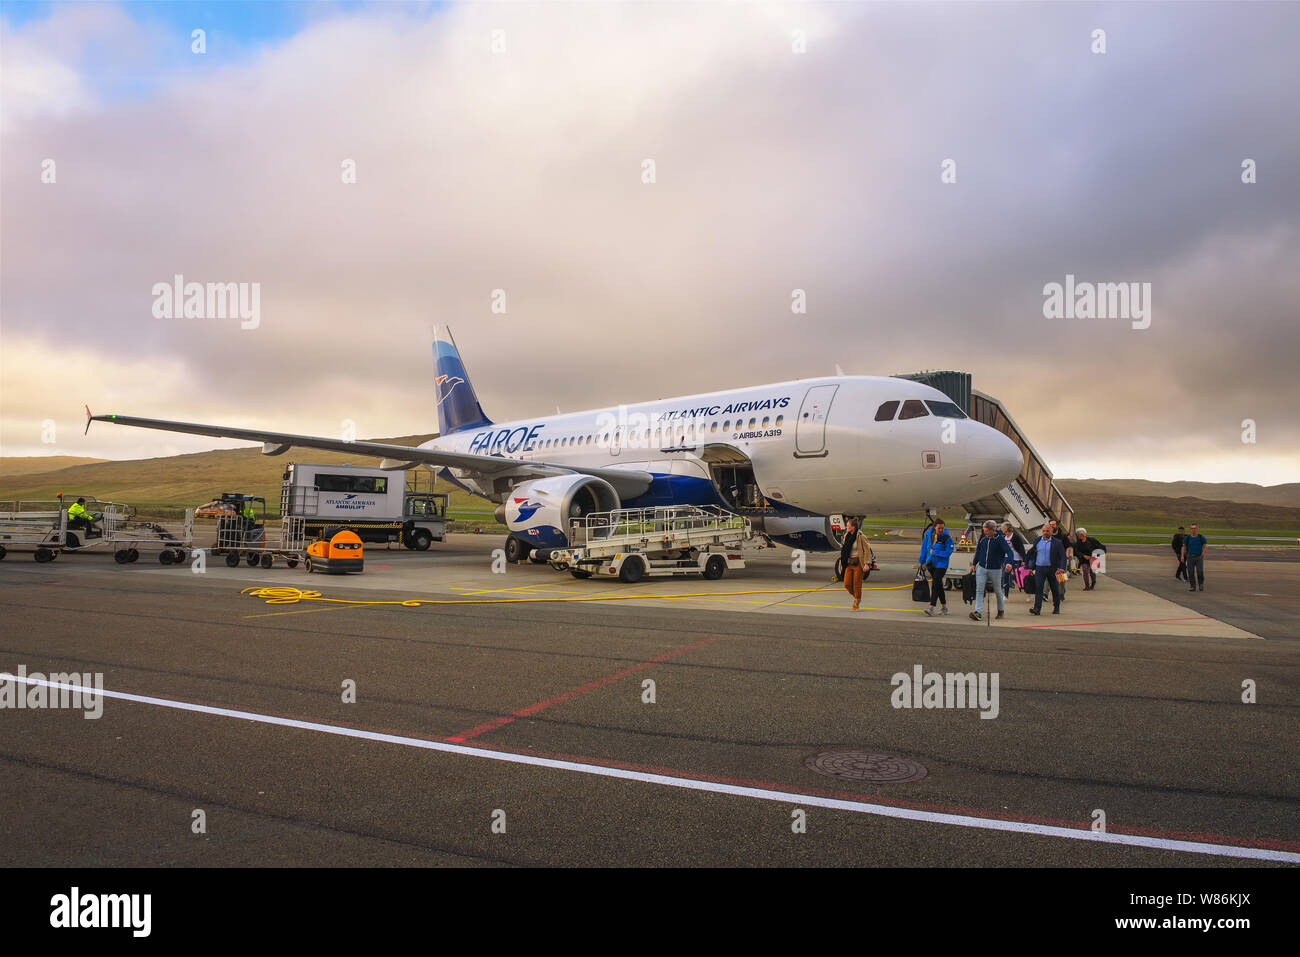 Passengers disembark from airplane at the Faroe Islands airport Stock Photo